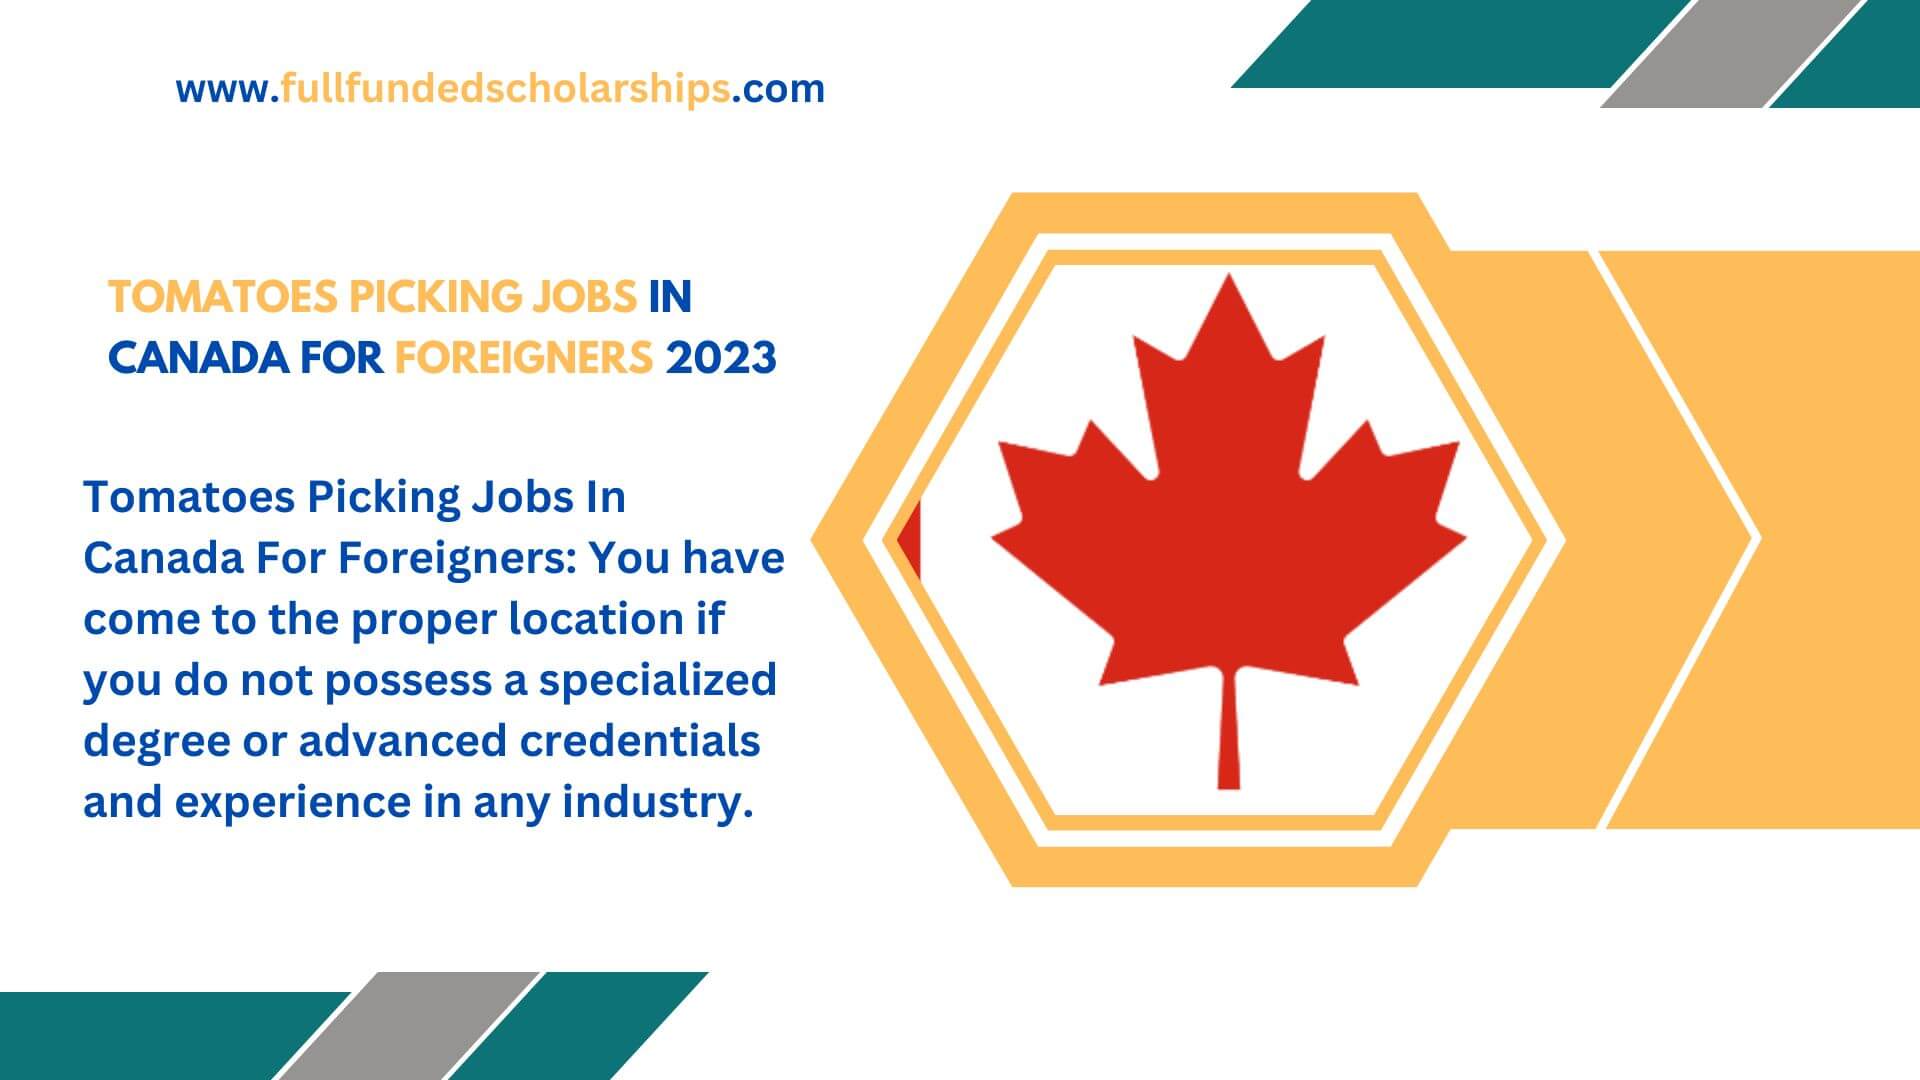 Tomatoes Picking Jobs In Canada For Foreigners 2023 - Apply Now